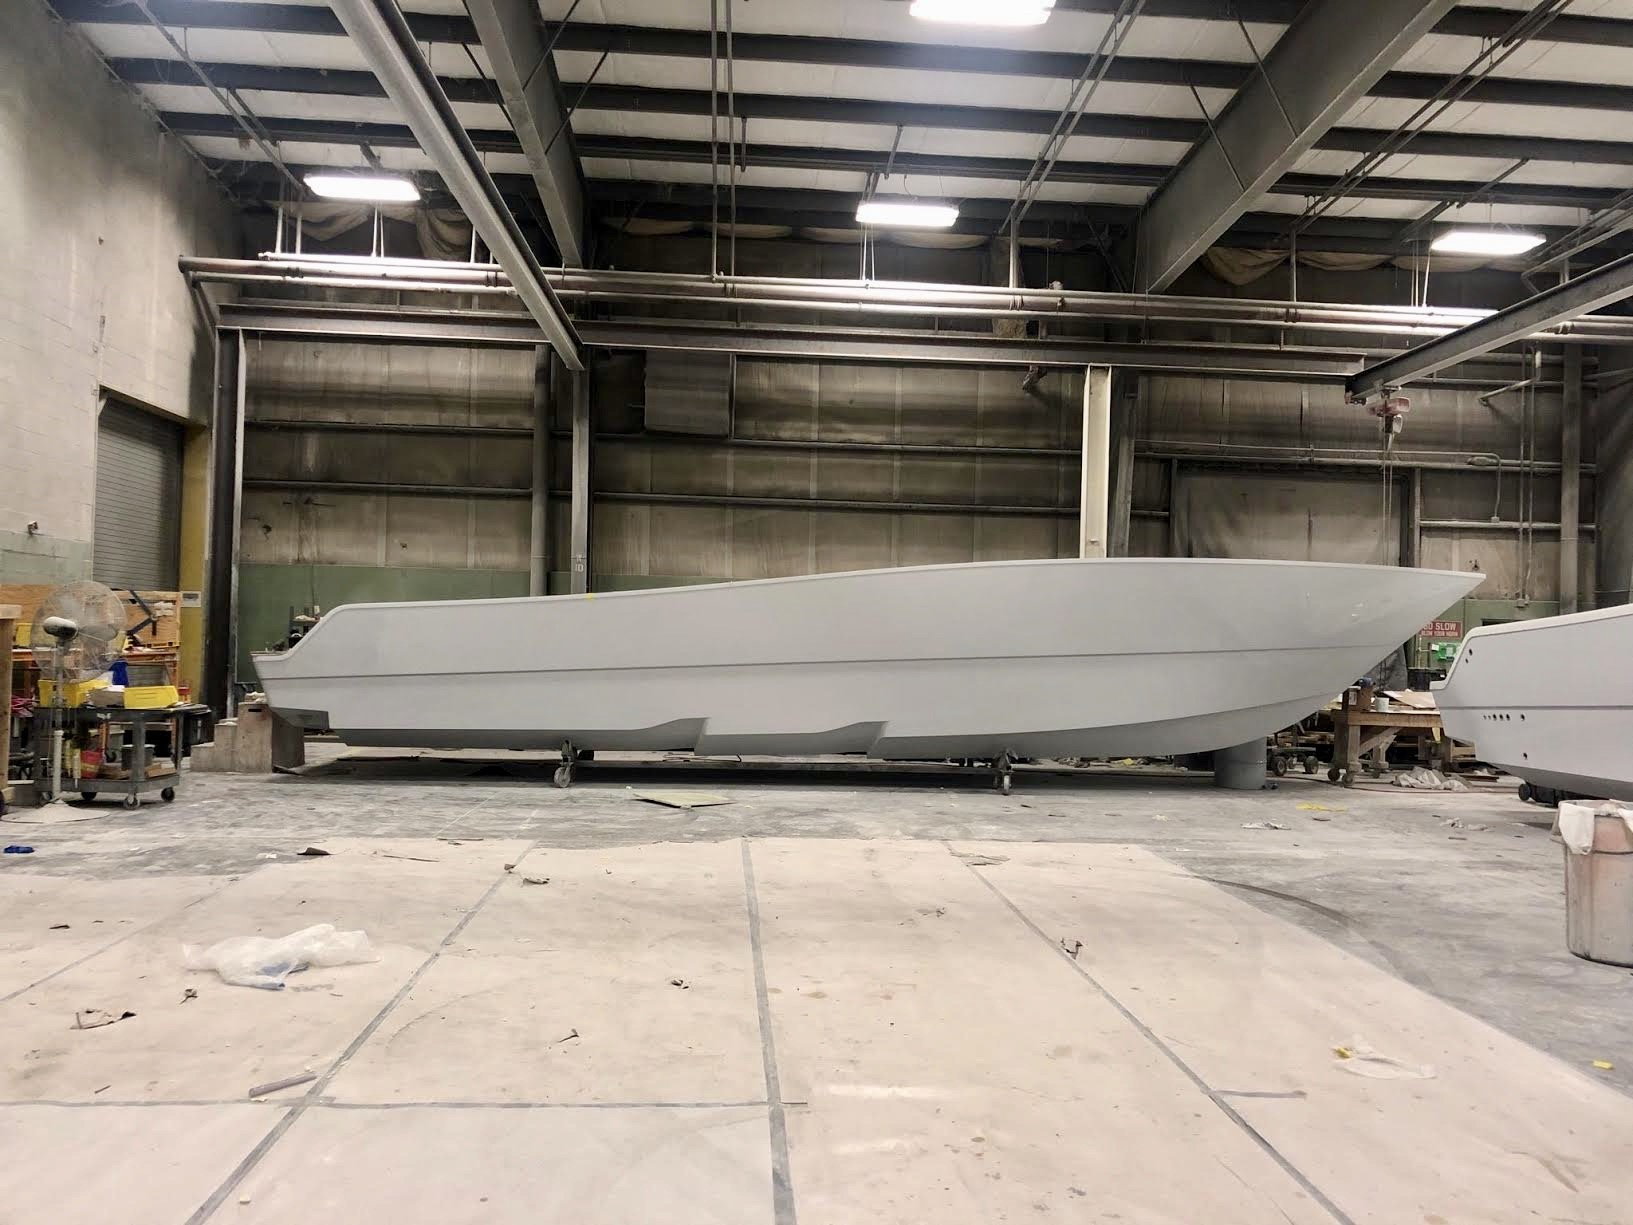 Building what is still the World’s Greatest Center Console Fishing Boat ...